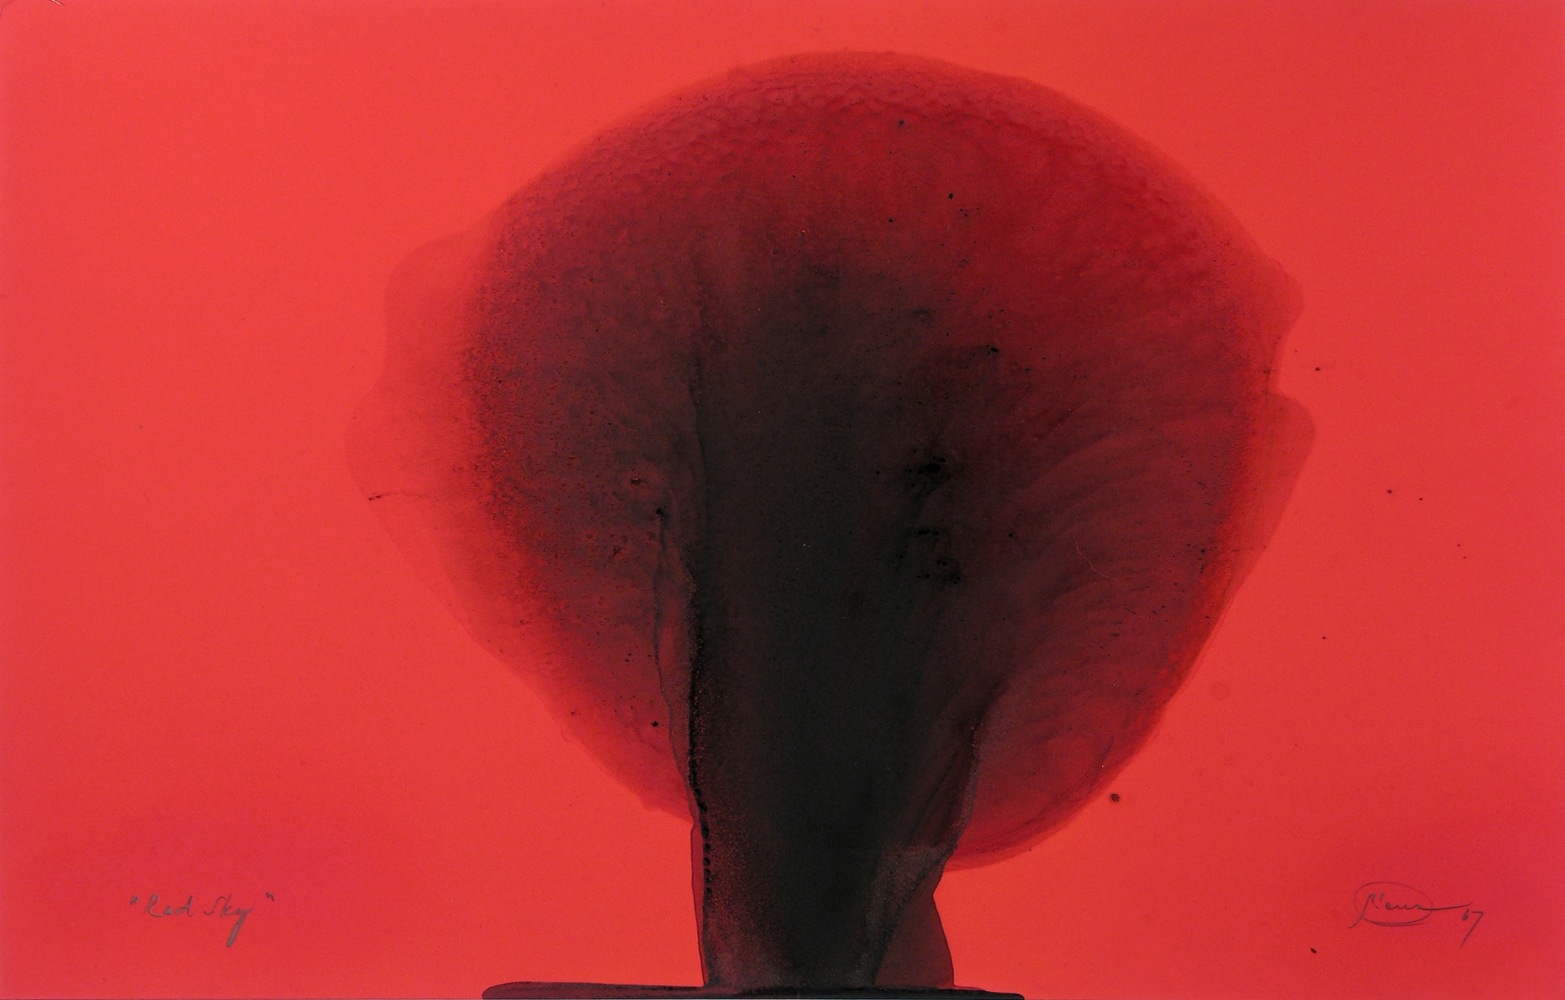 Otto Piene
Red Sky, 1967
pigment and soot on paper
18 7/8 x 26 7/8 inches (47,9 x 68,3 cm)
22 1/2 x 30 3/4 inches (57,2 x 78 cm) frame
SW 09230
Private Collection